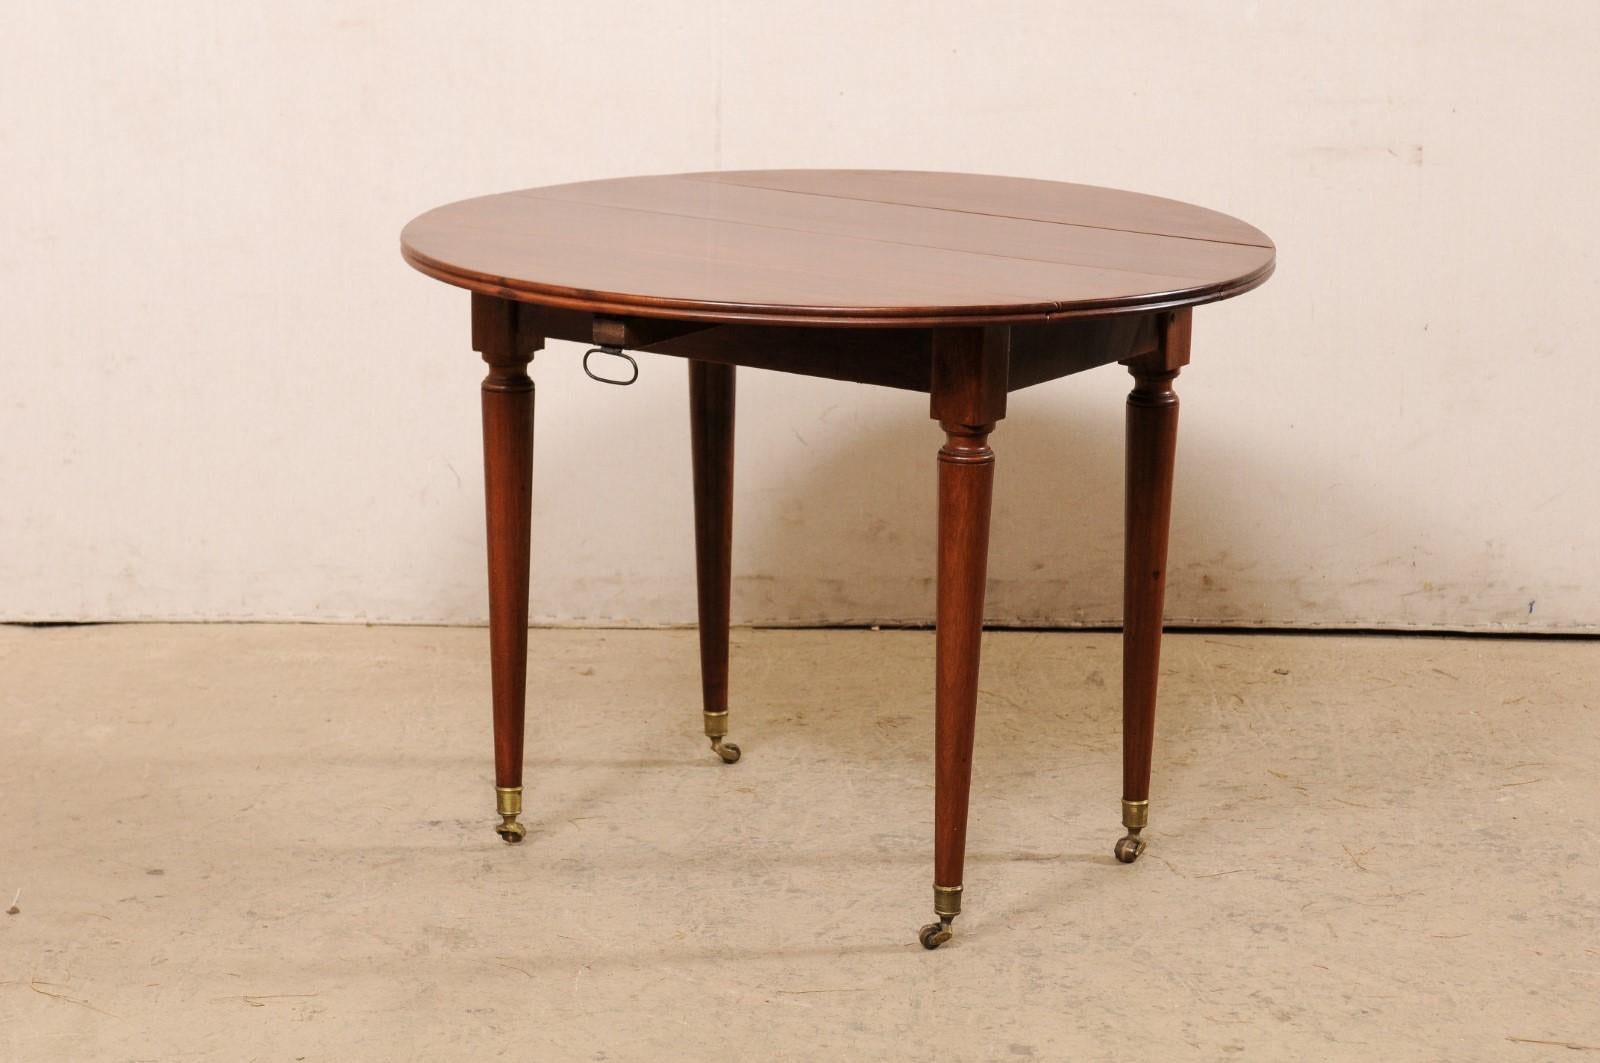 French 19th C. Mahogany Round Table W/Drop Leaves & Petite Brass Caster Feet For Sale 3